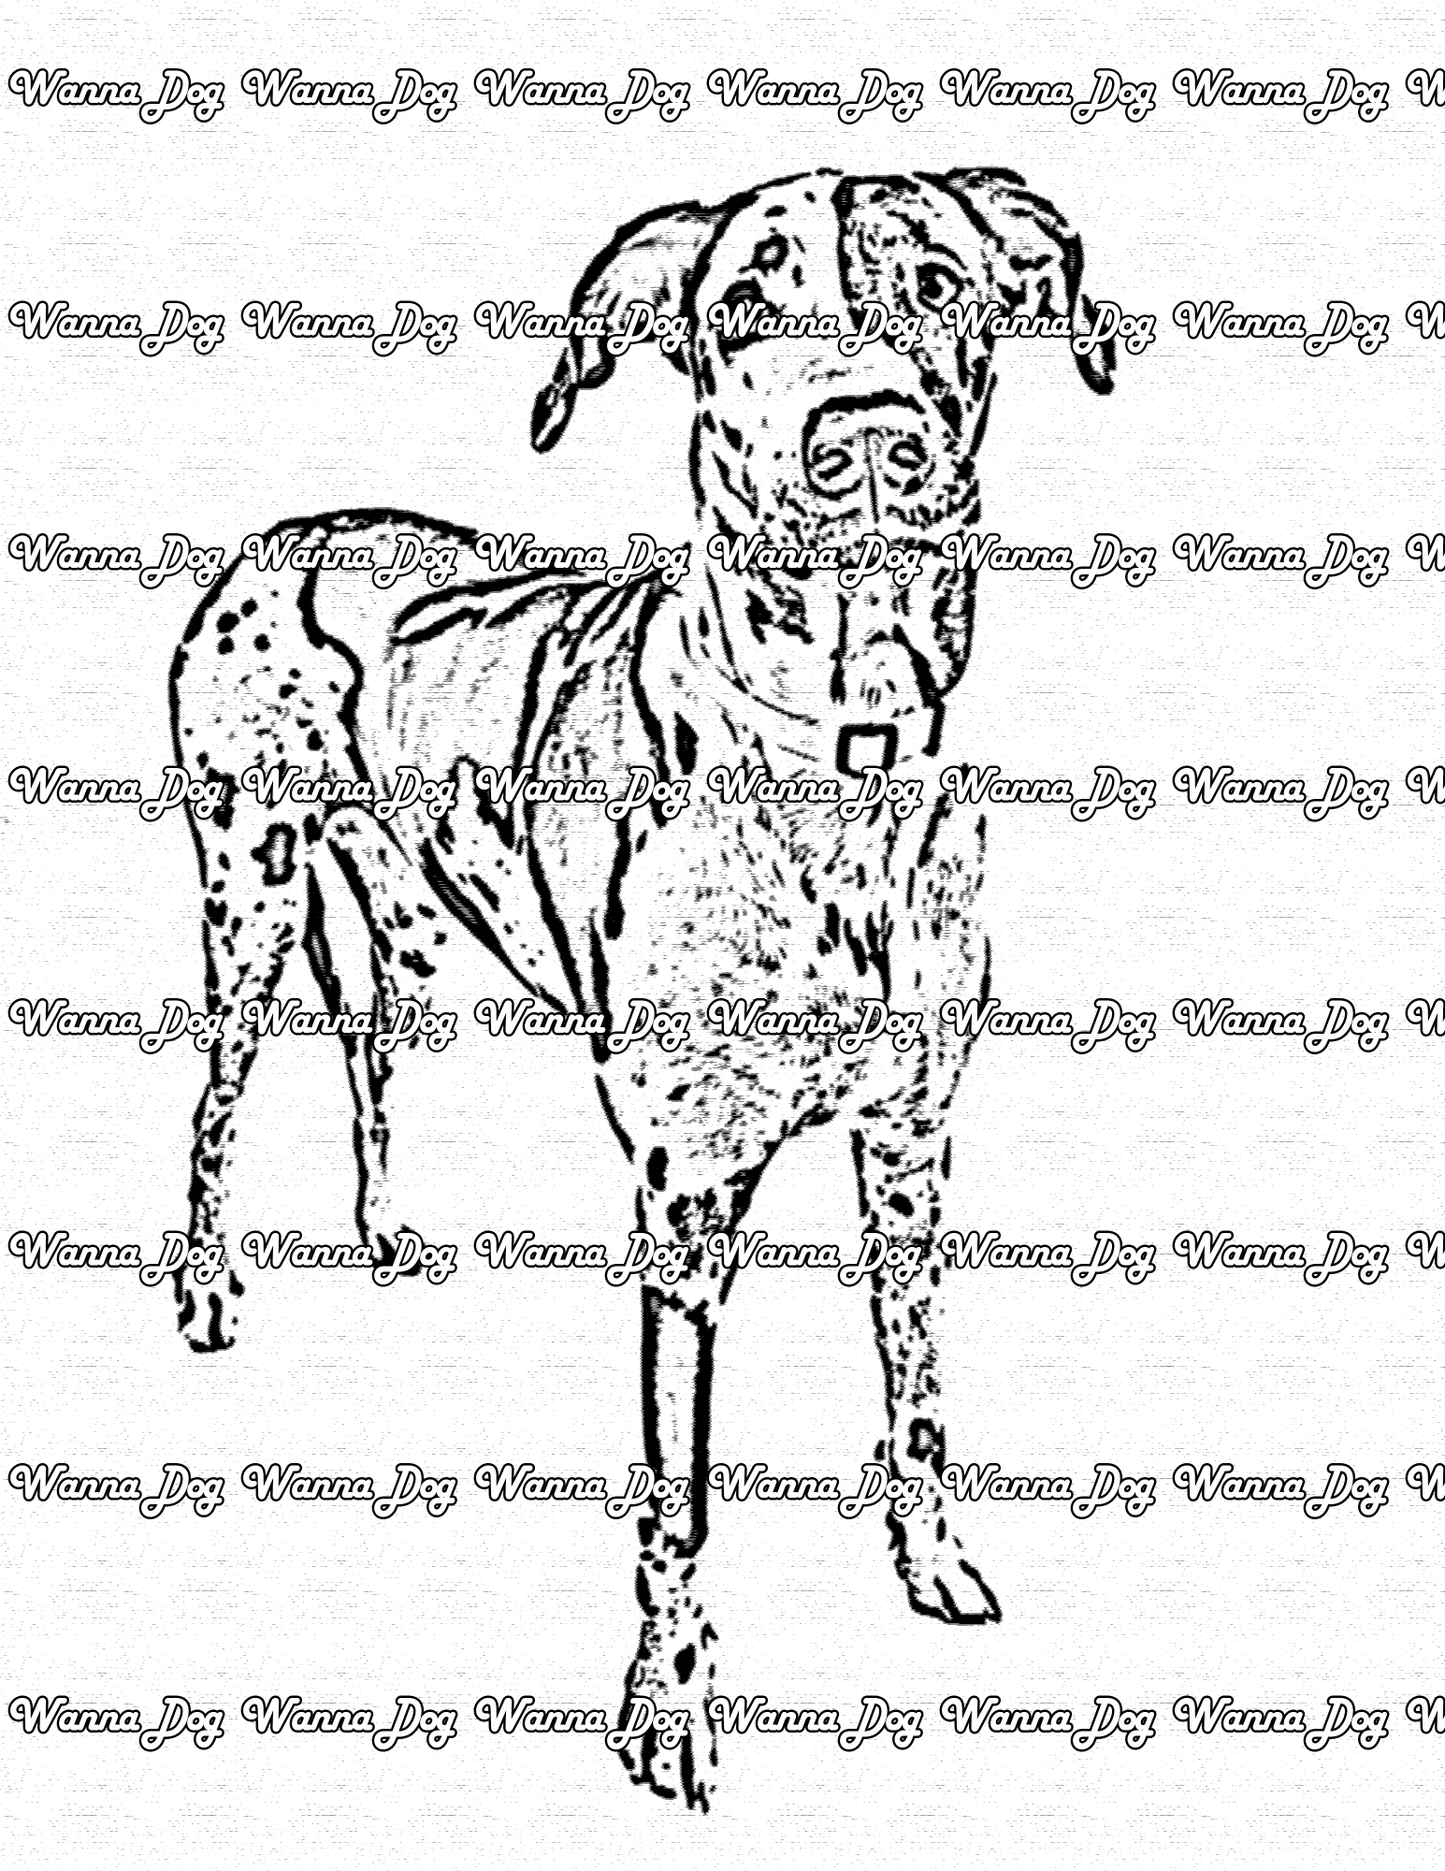 Great Dane Coloring Page of a Great Dane standing up for the camera